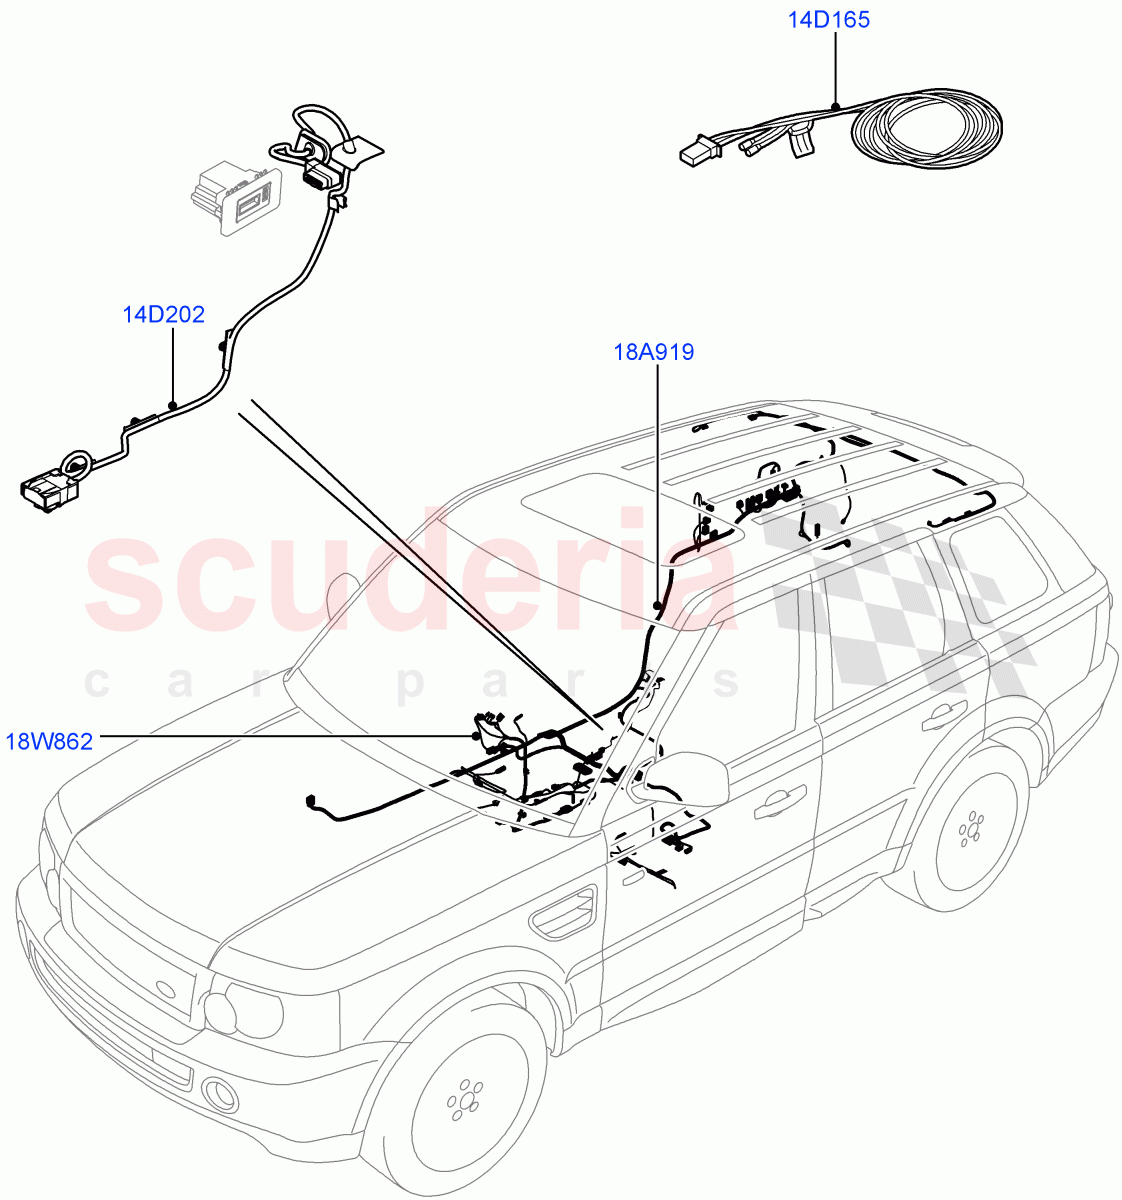 Electrical Wiring - Body And Rear(Audio/Navigation/Entertainment)((V)FROMAA000001,(V)TOAA999999) of Land Rover Land Rover Range Rover Sport (2010-2013) [5.0 OHC SGDI SC V8 Petrol]